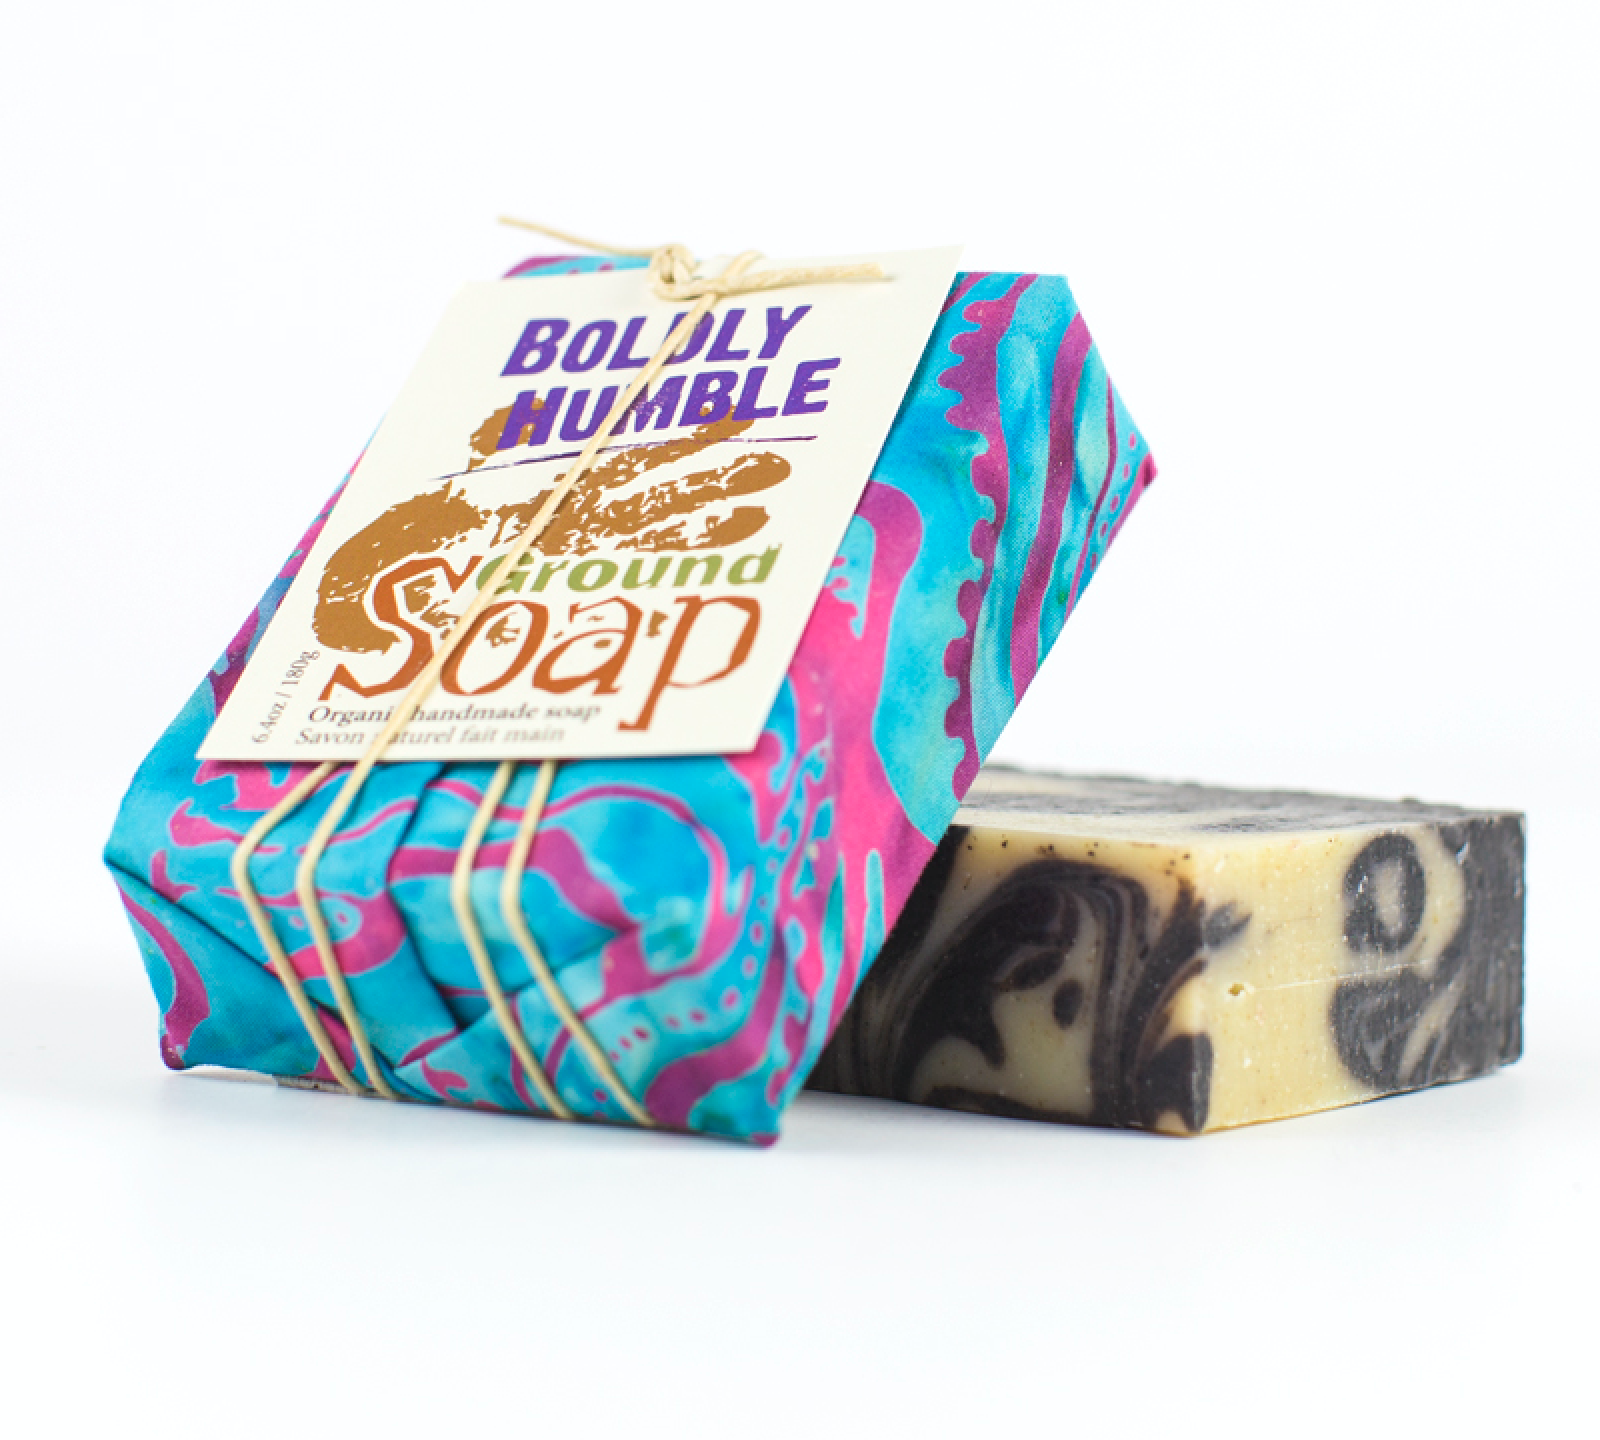 Ground Soap - Boldly Humble